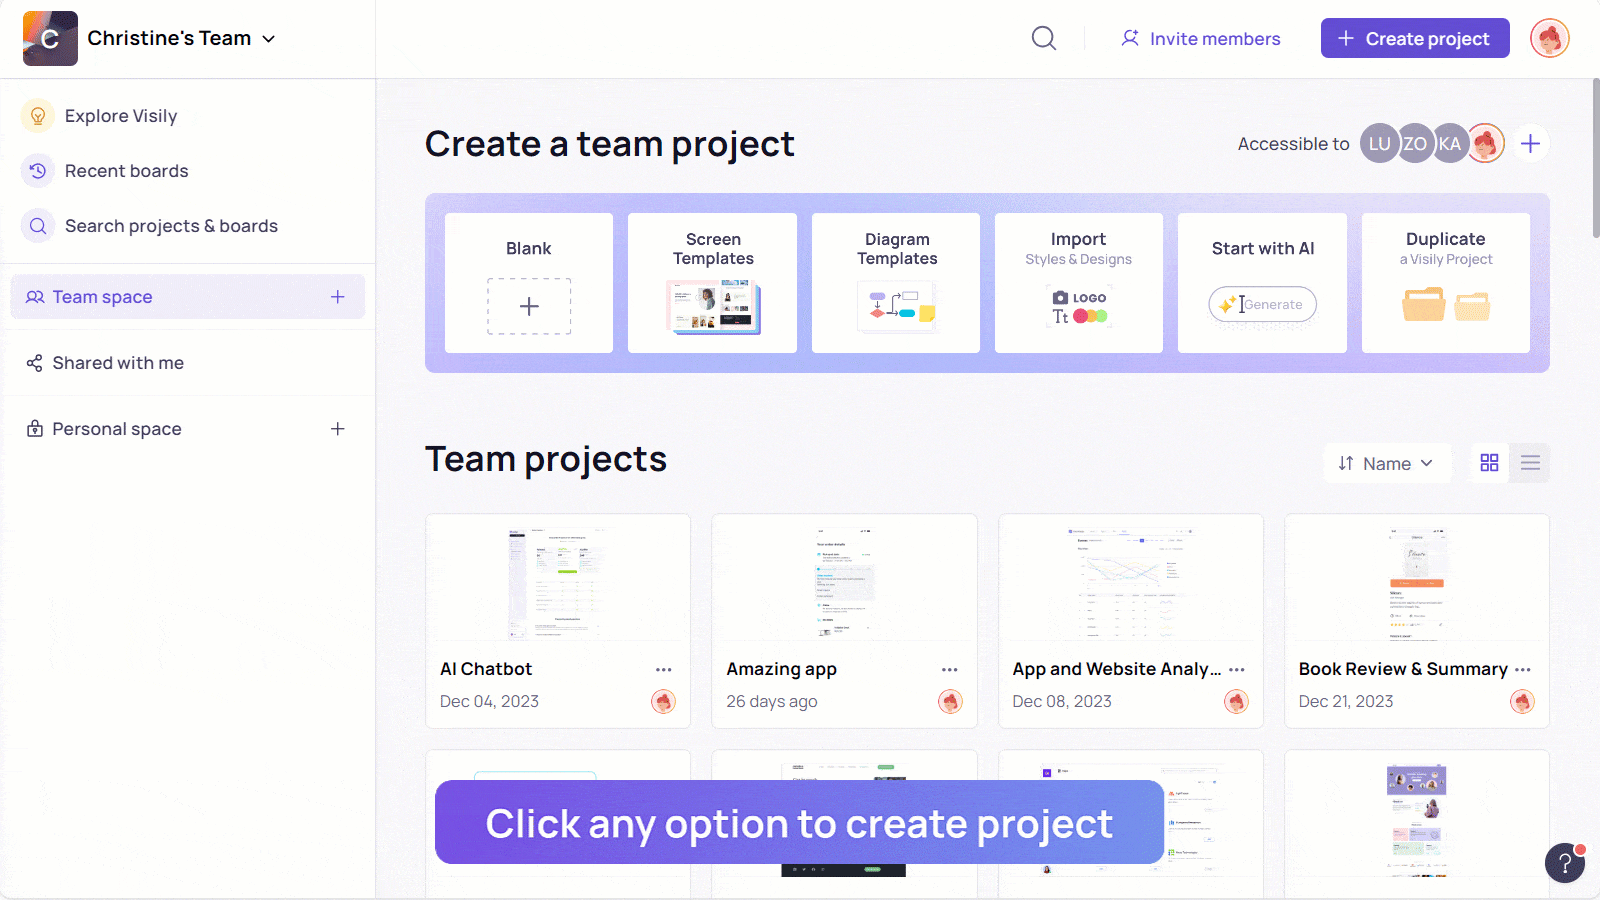 Where to create projects b min